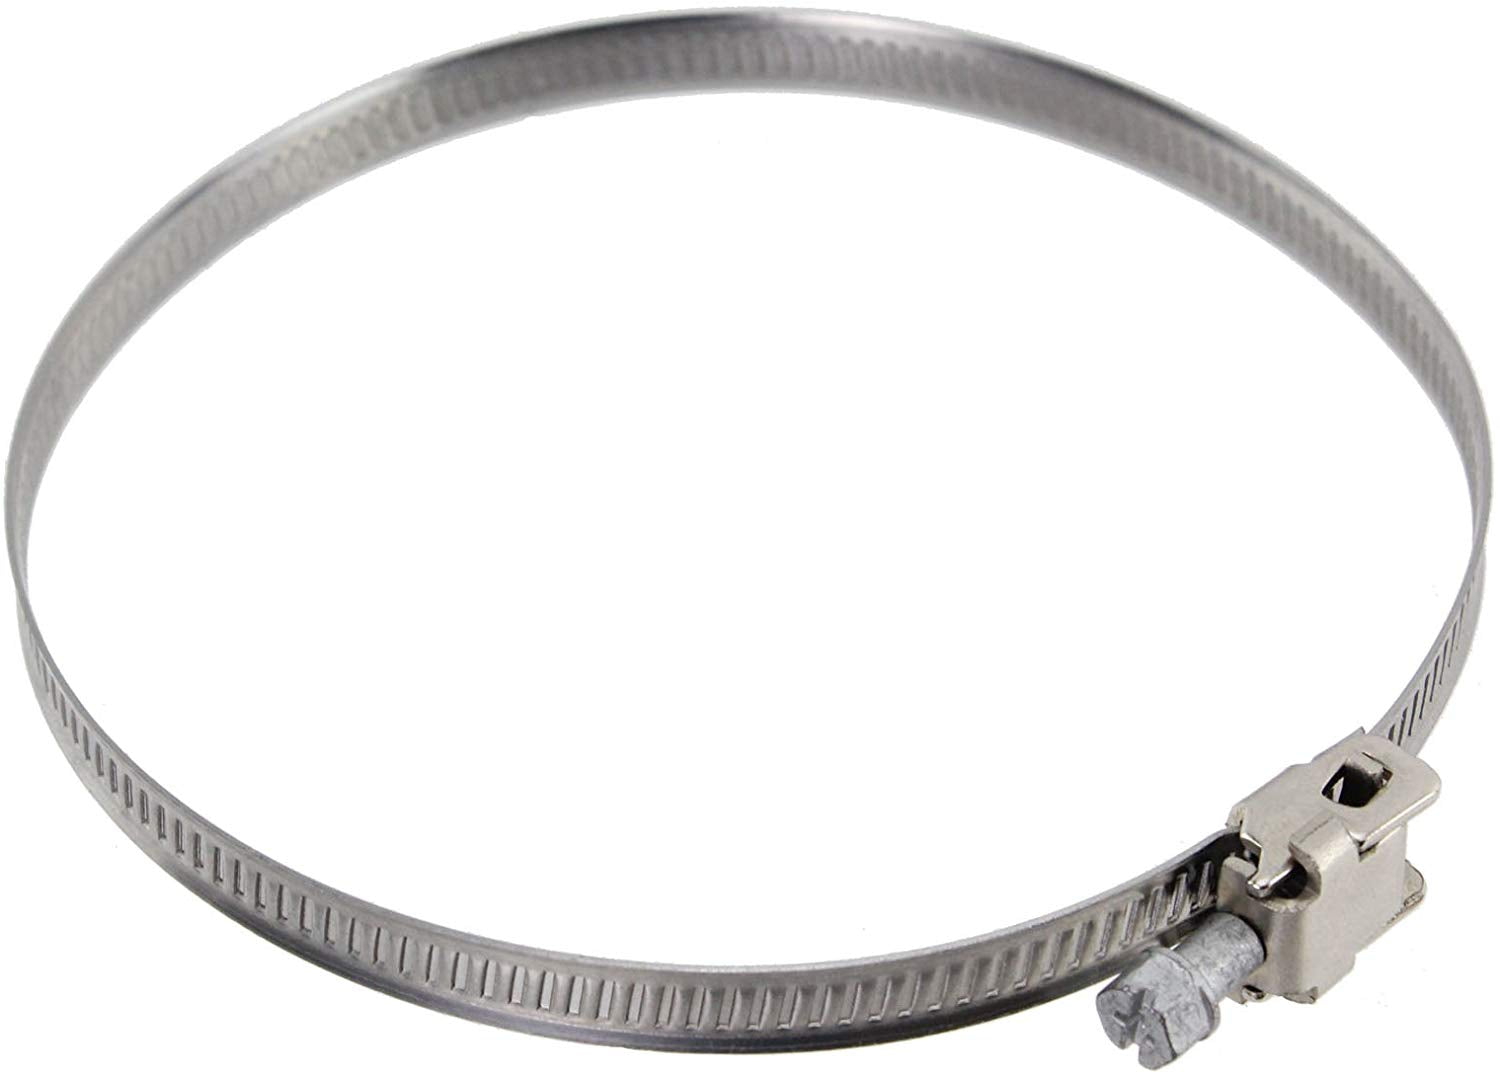 Condenser Box & Extra Long Hose Kit With Connection Ring for Hotpoint Tumble Dryer (4" / 100mm Diameter / 6M Hose)